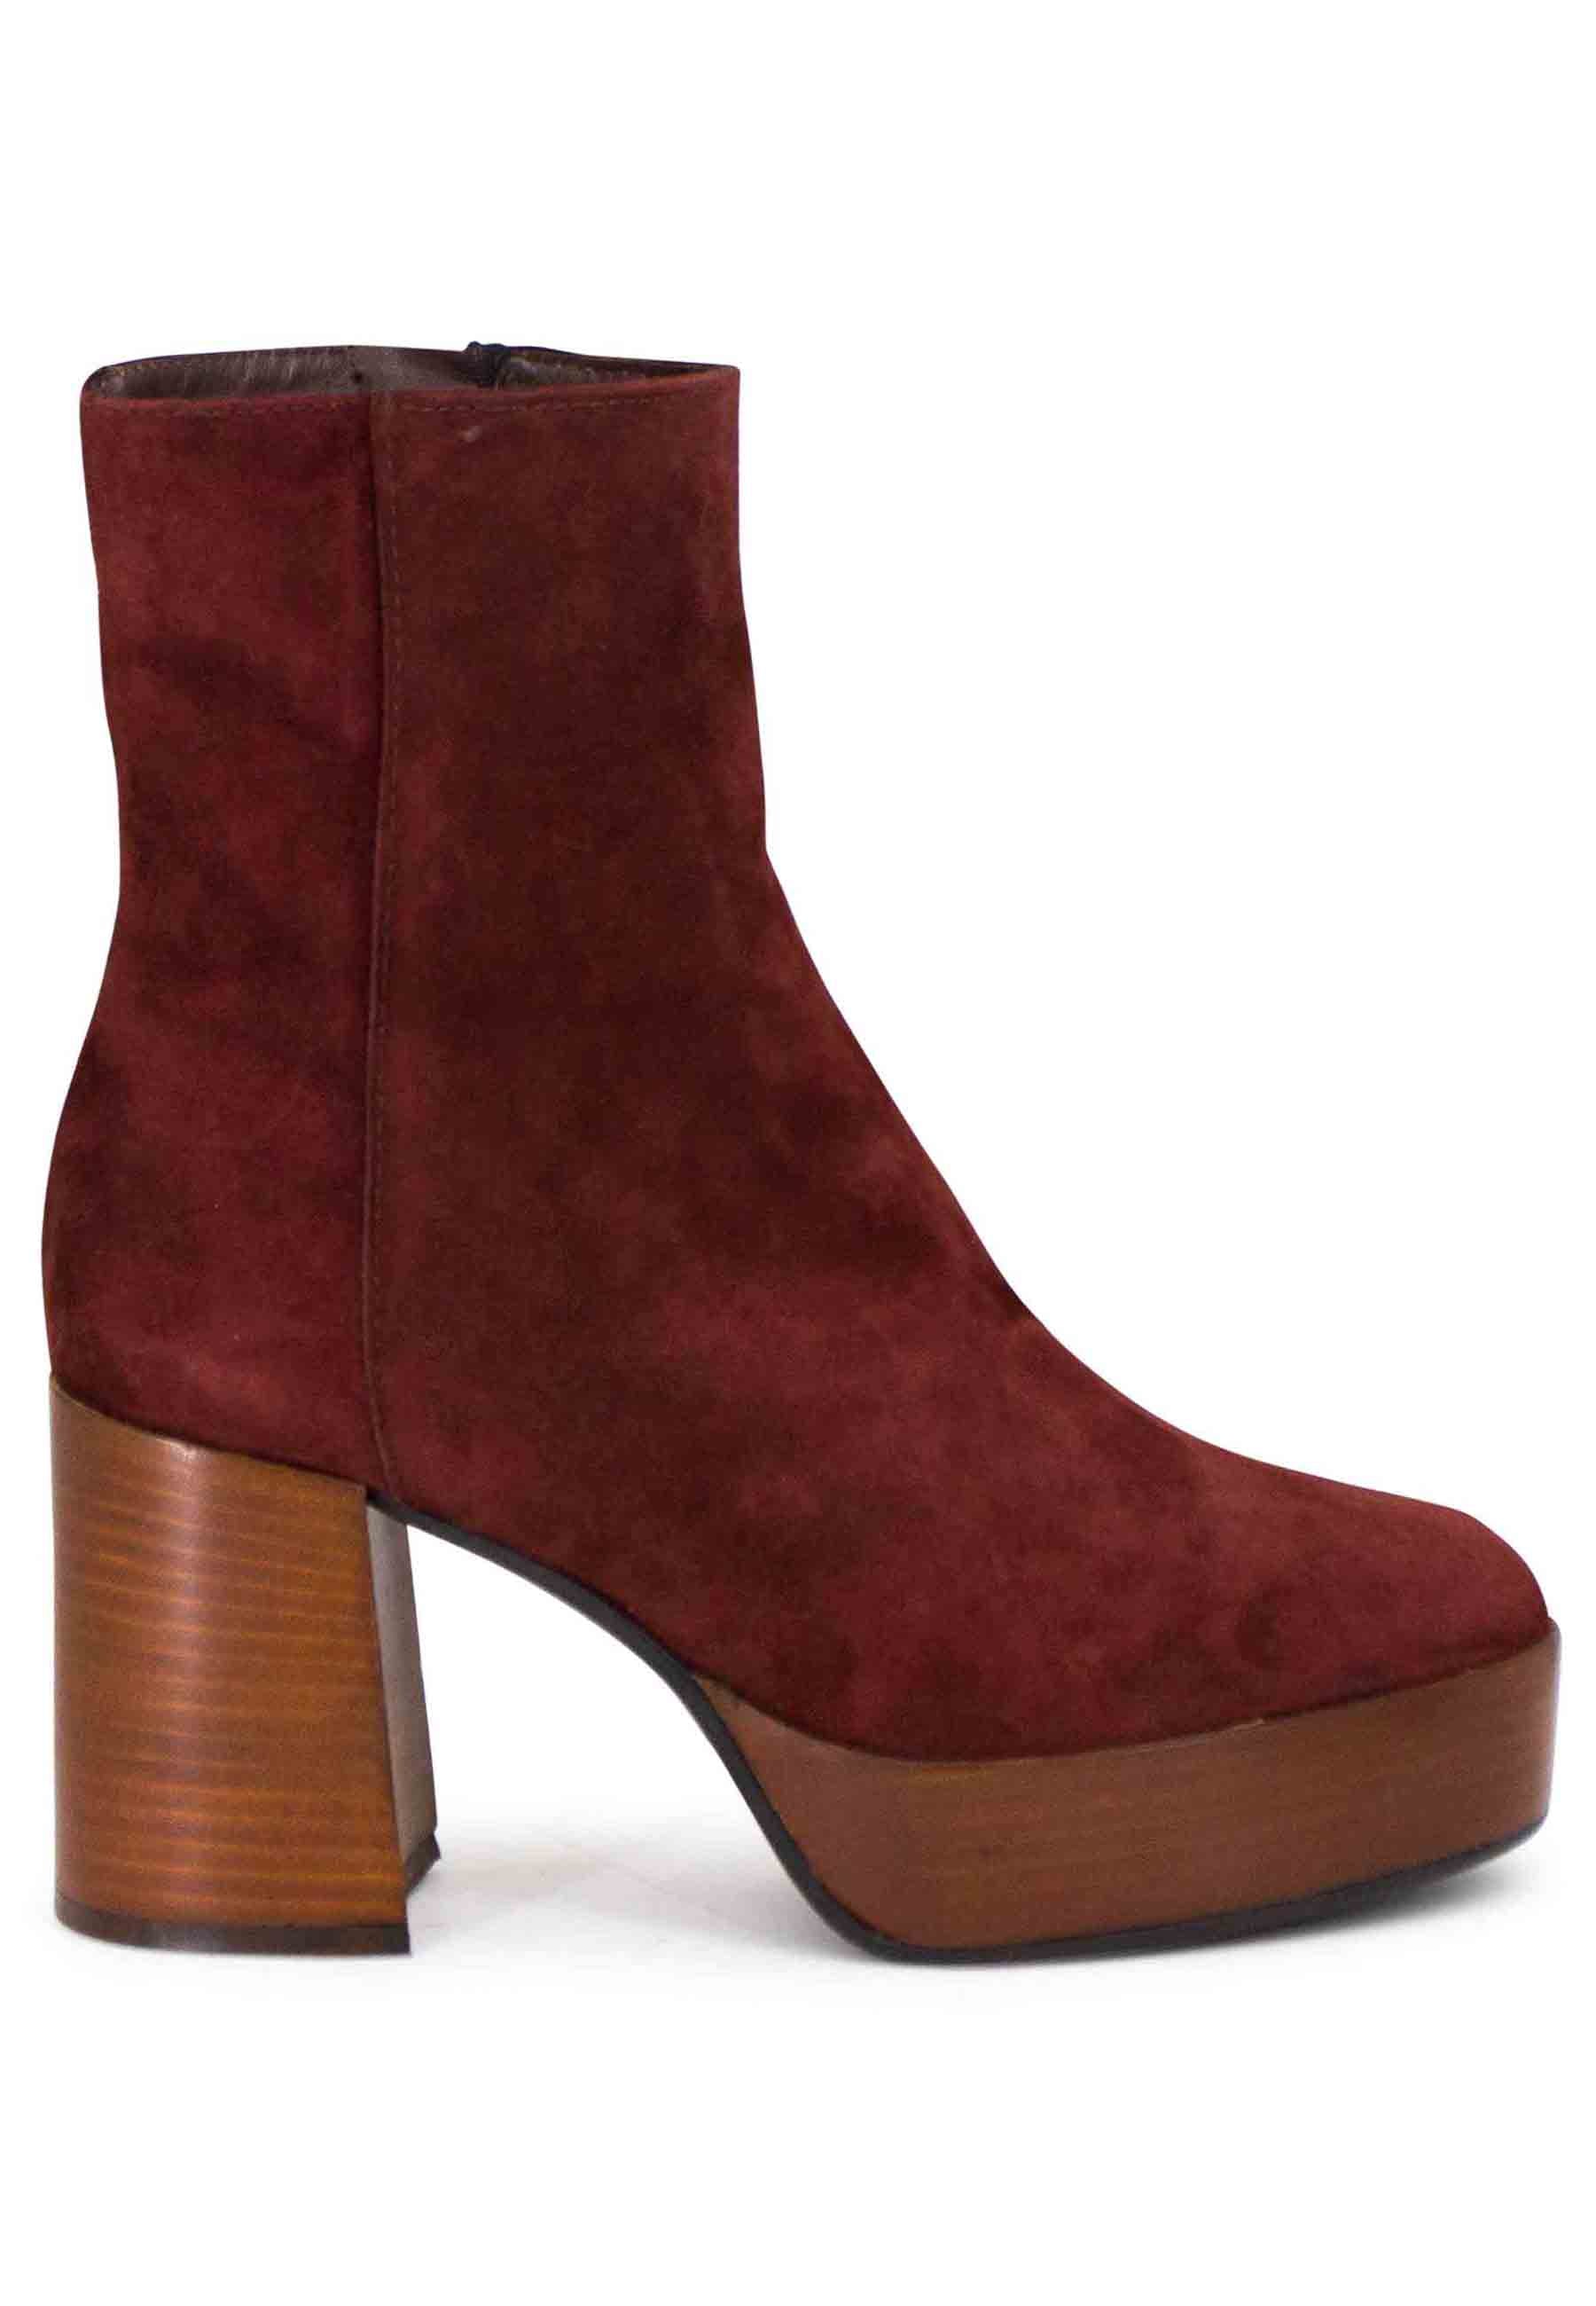 Women's ankle boots in brick suede with high heel and platform with side zip closure